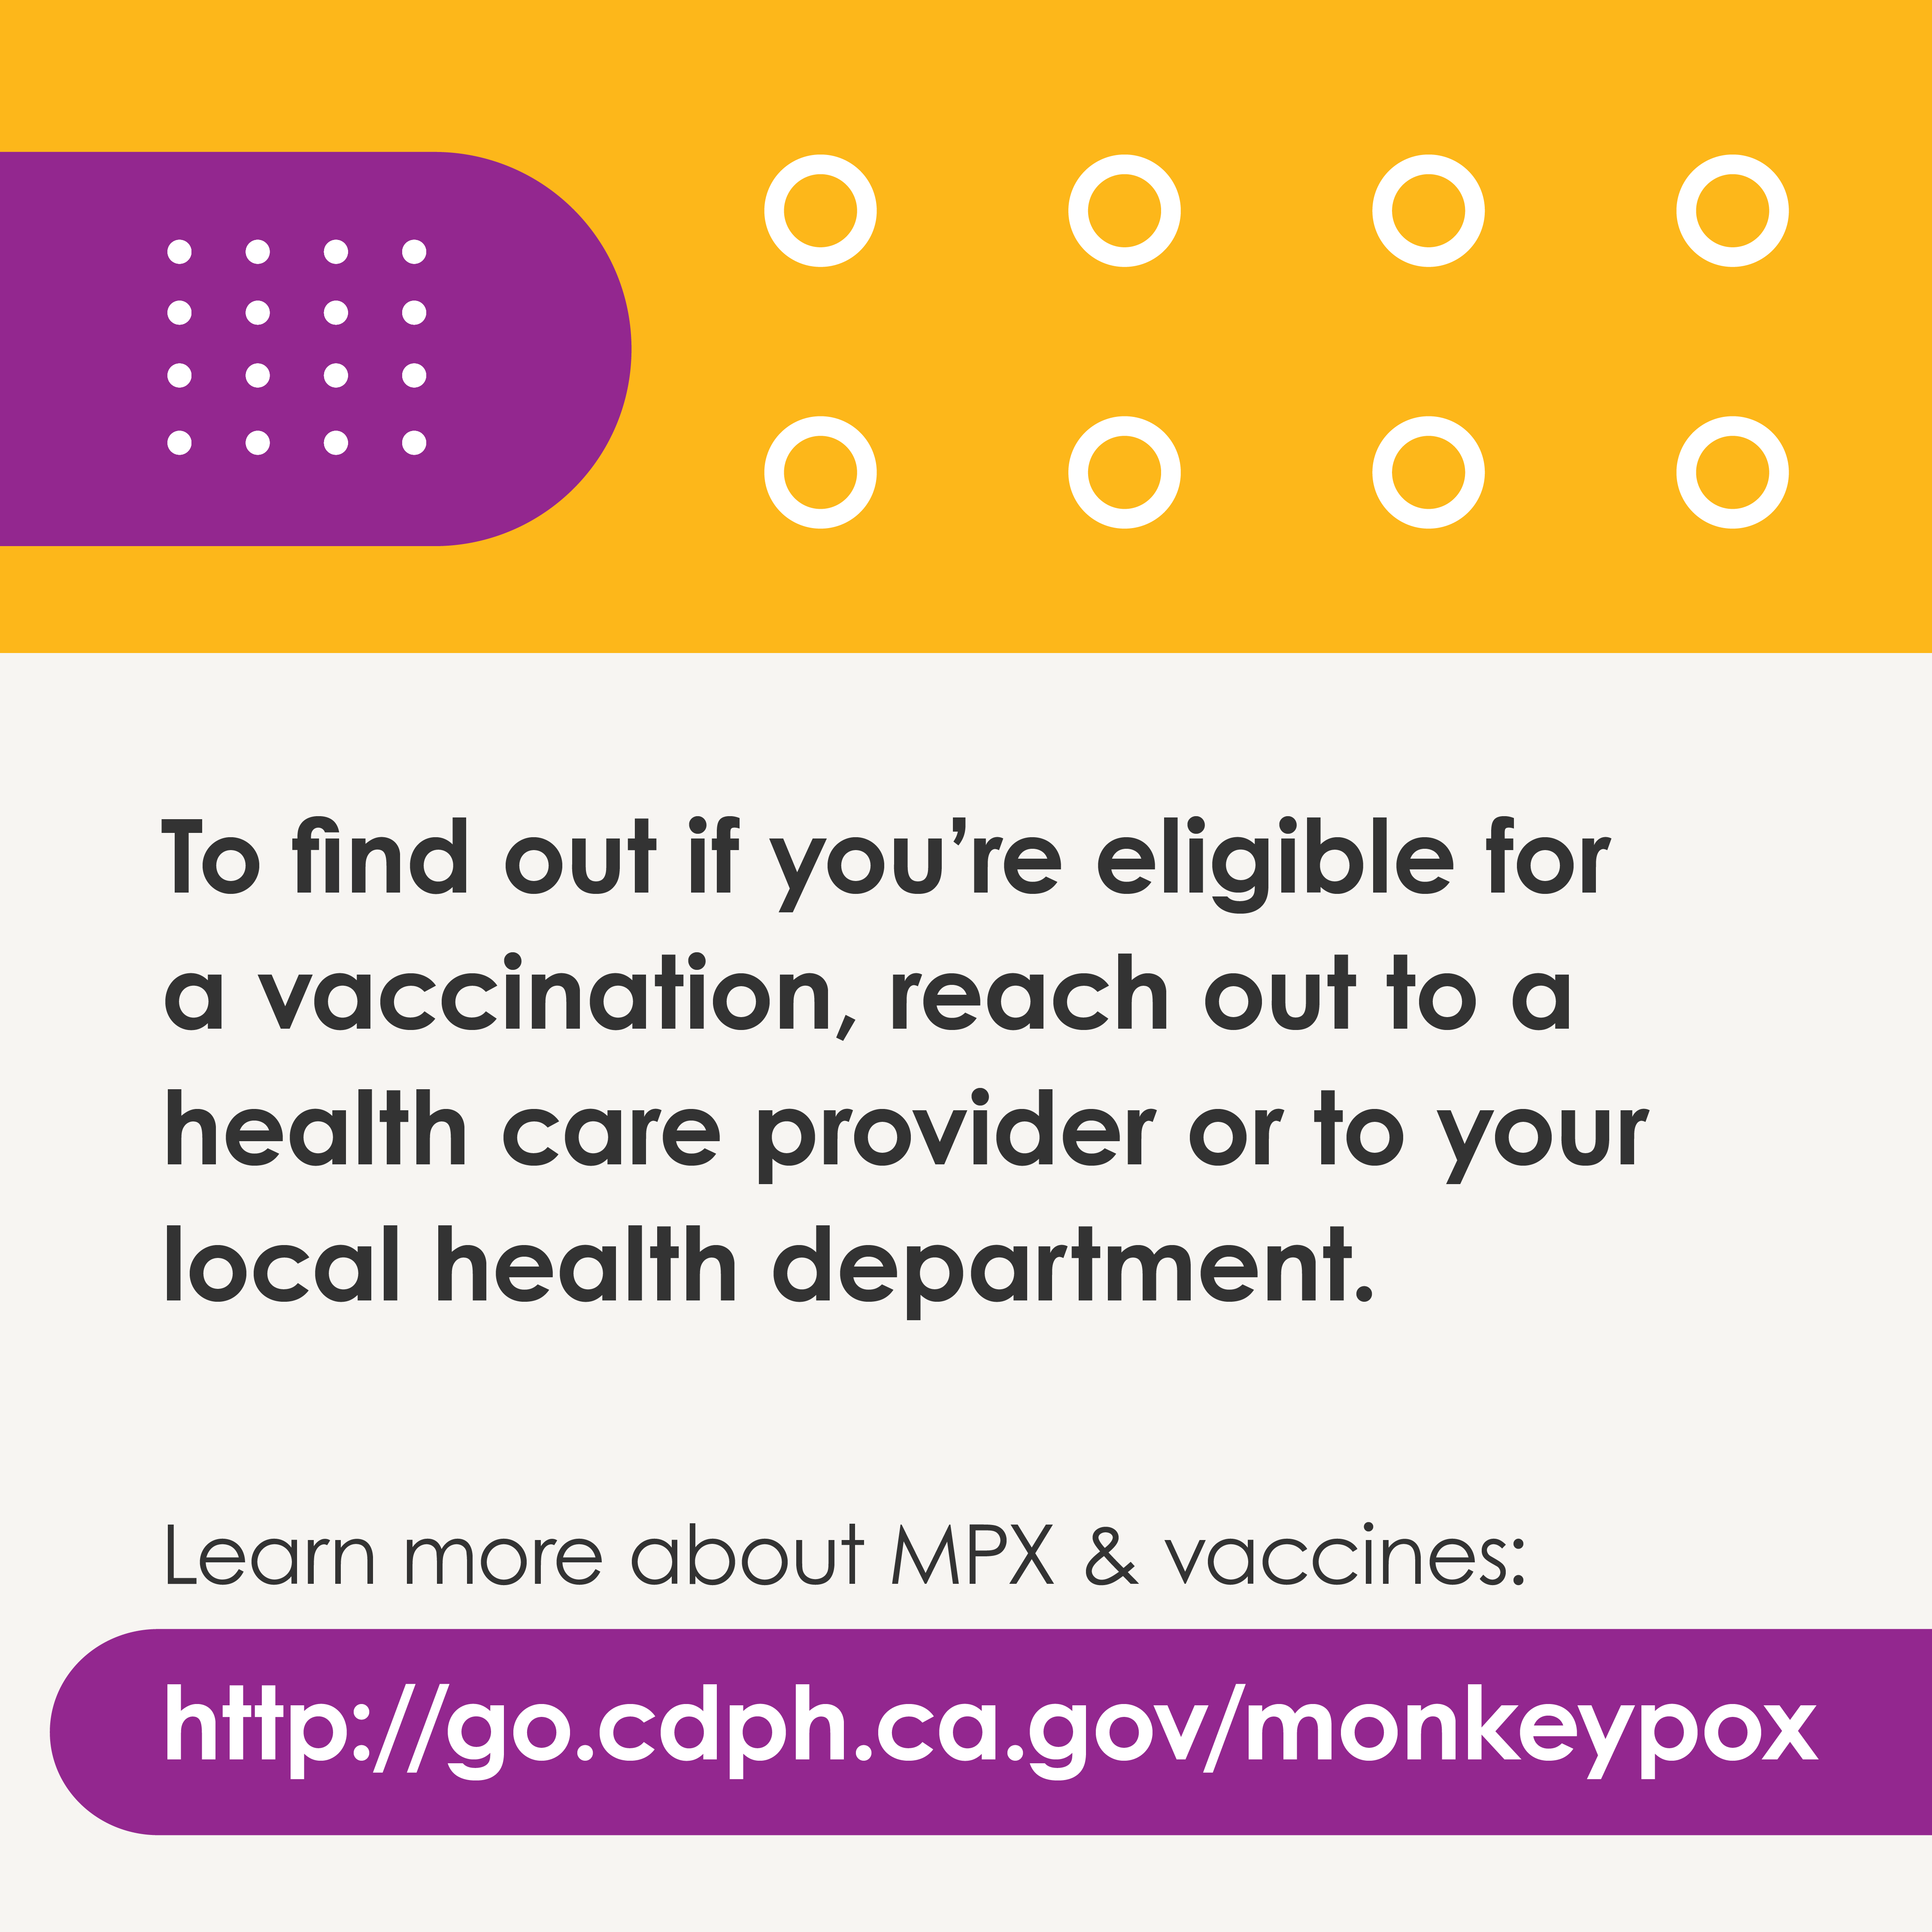 To find out if you're eligible for a vaccination, reach out to a health care provider or to your local health department